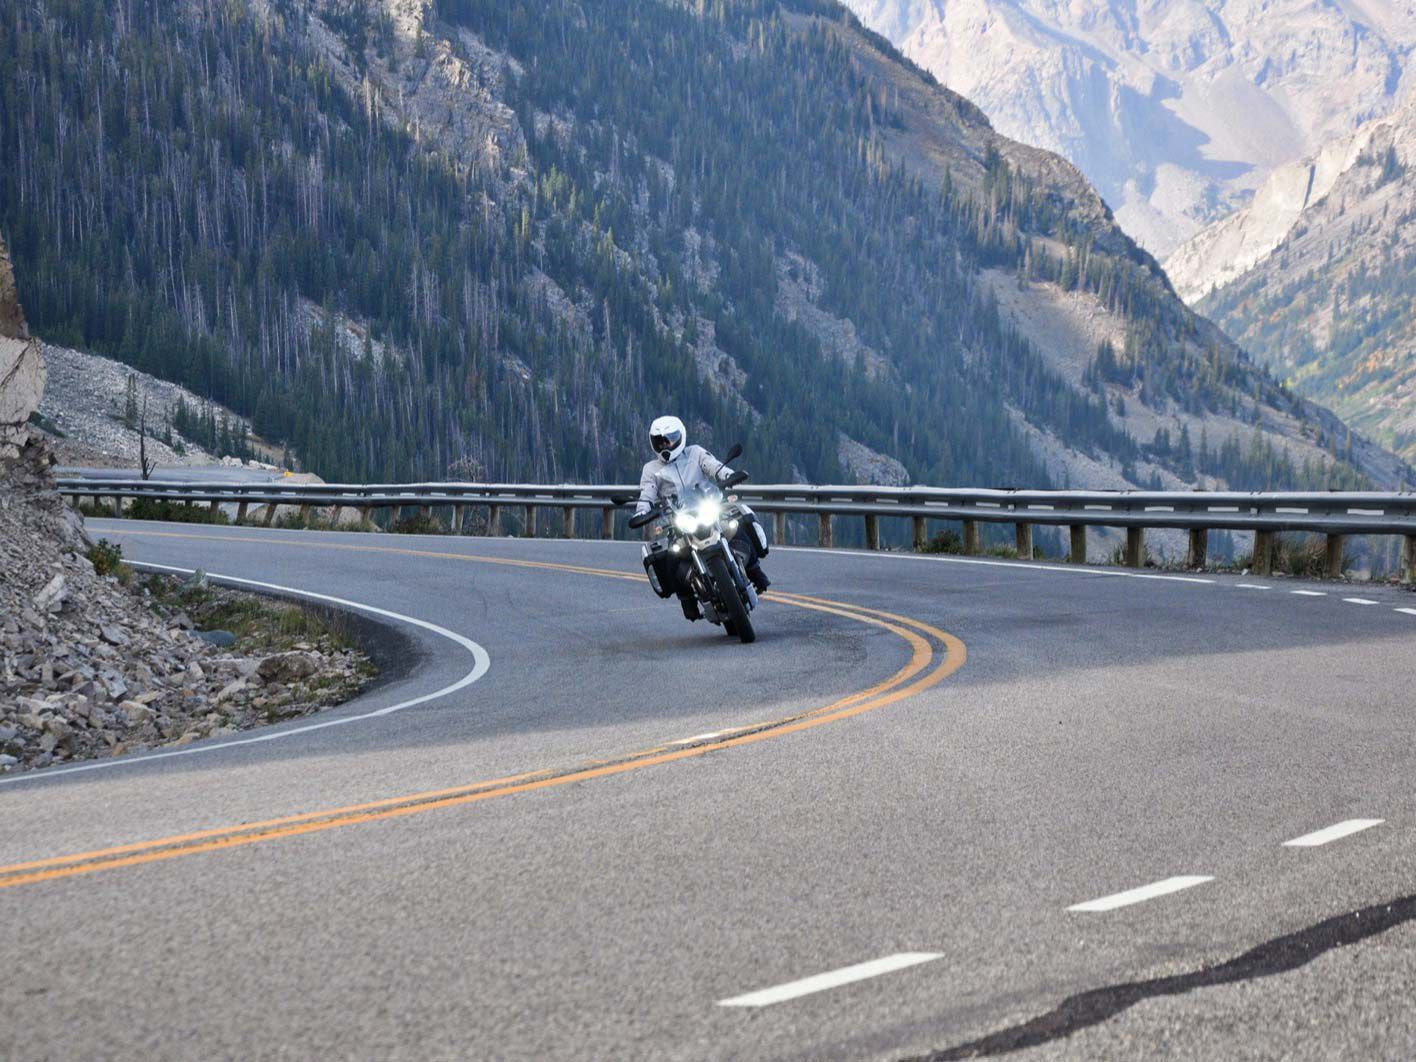 Join the Moto Guzzi Experience in 2022 and see some of the most breathtaking sights in the country.